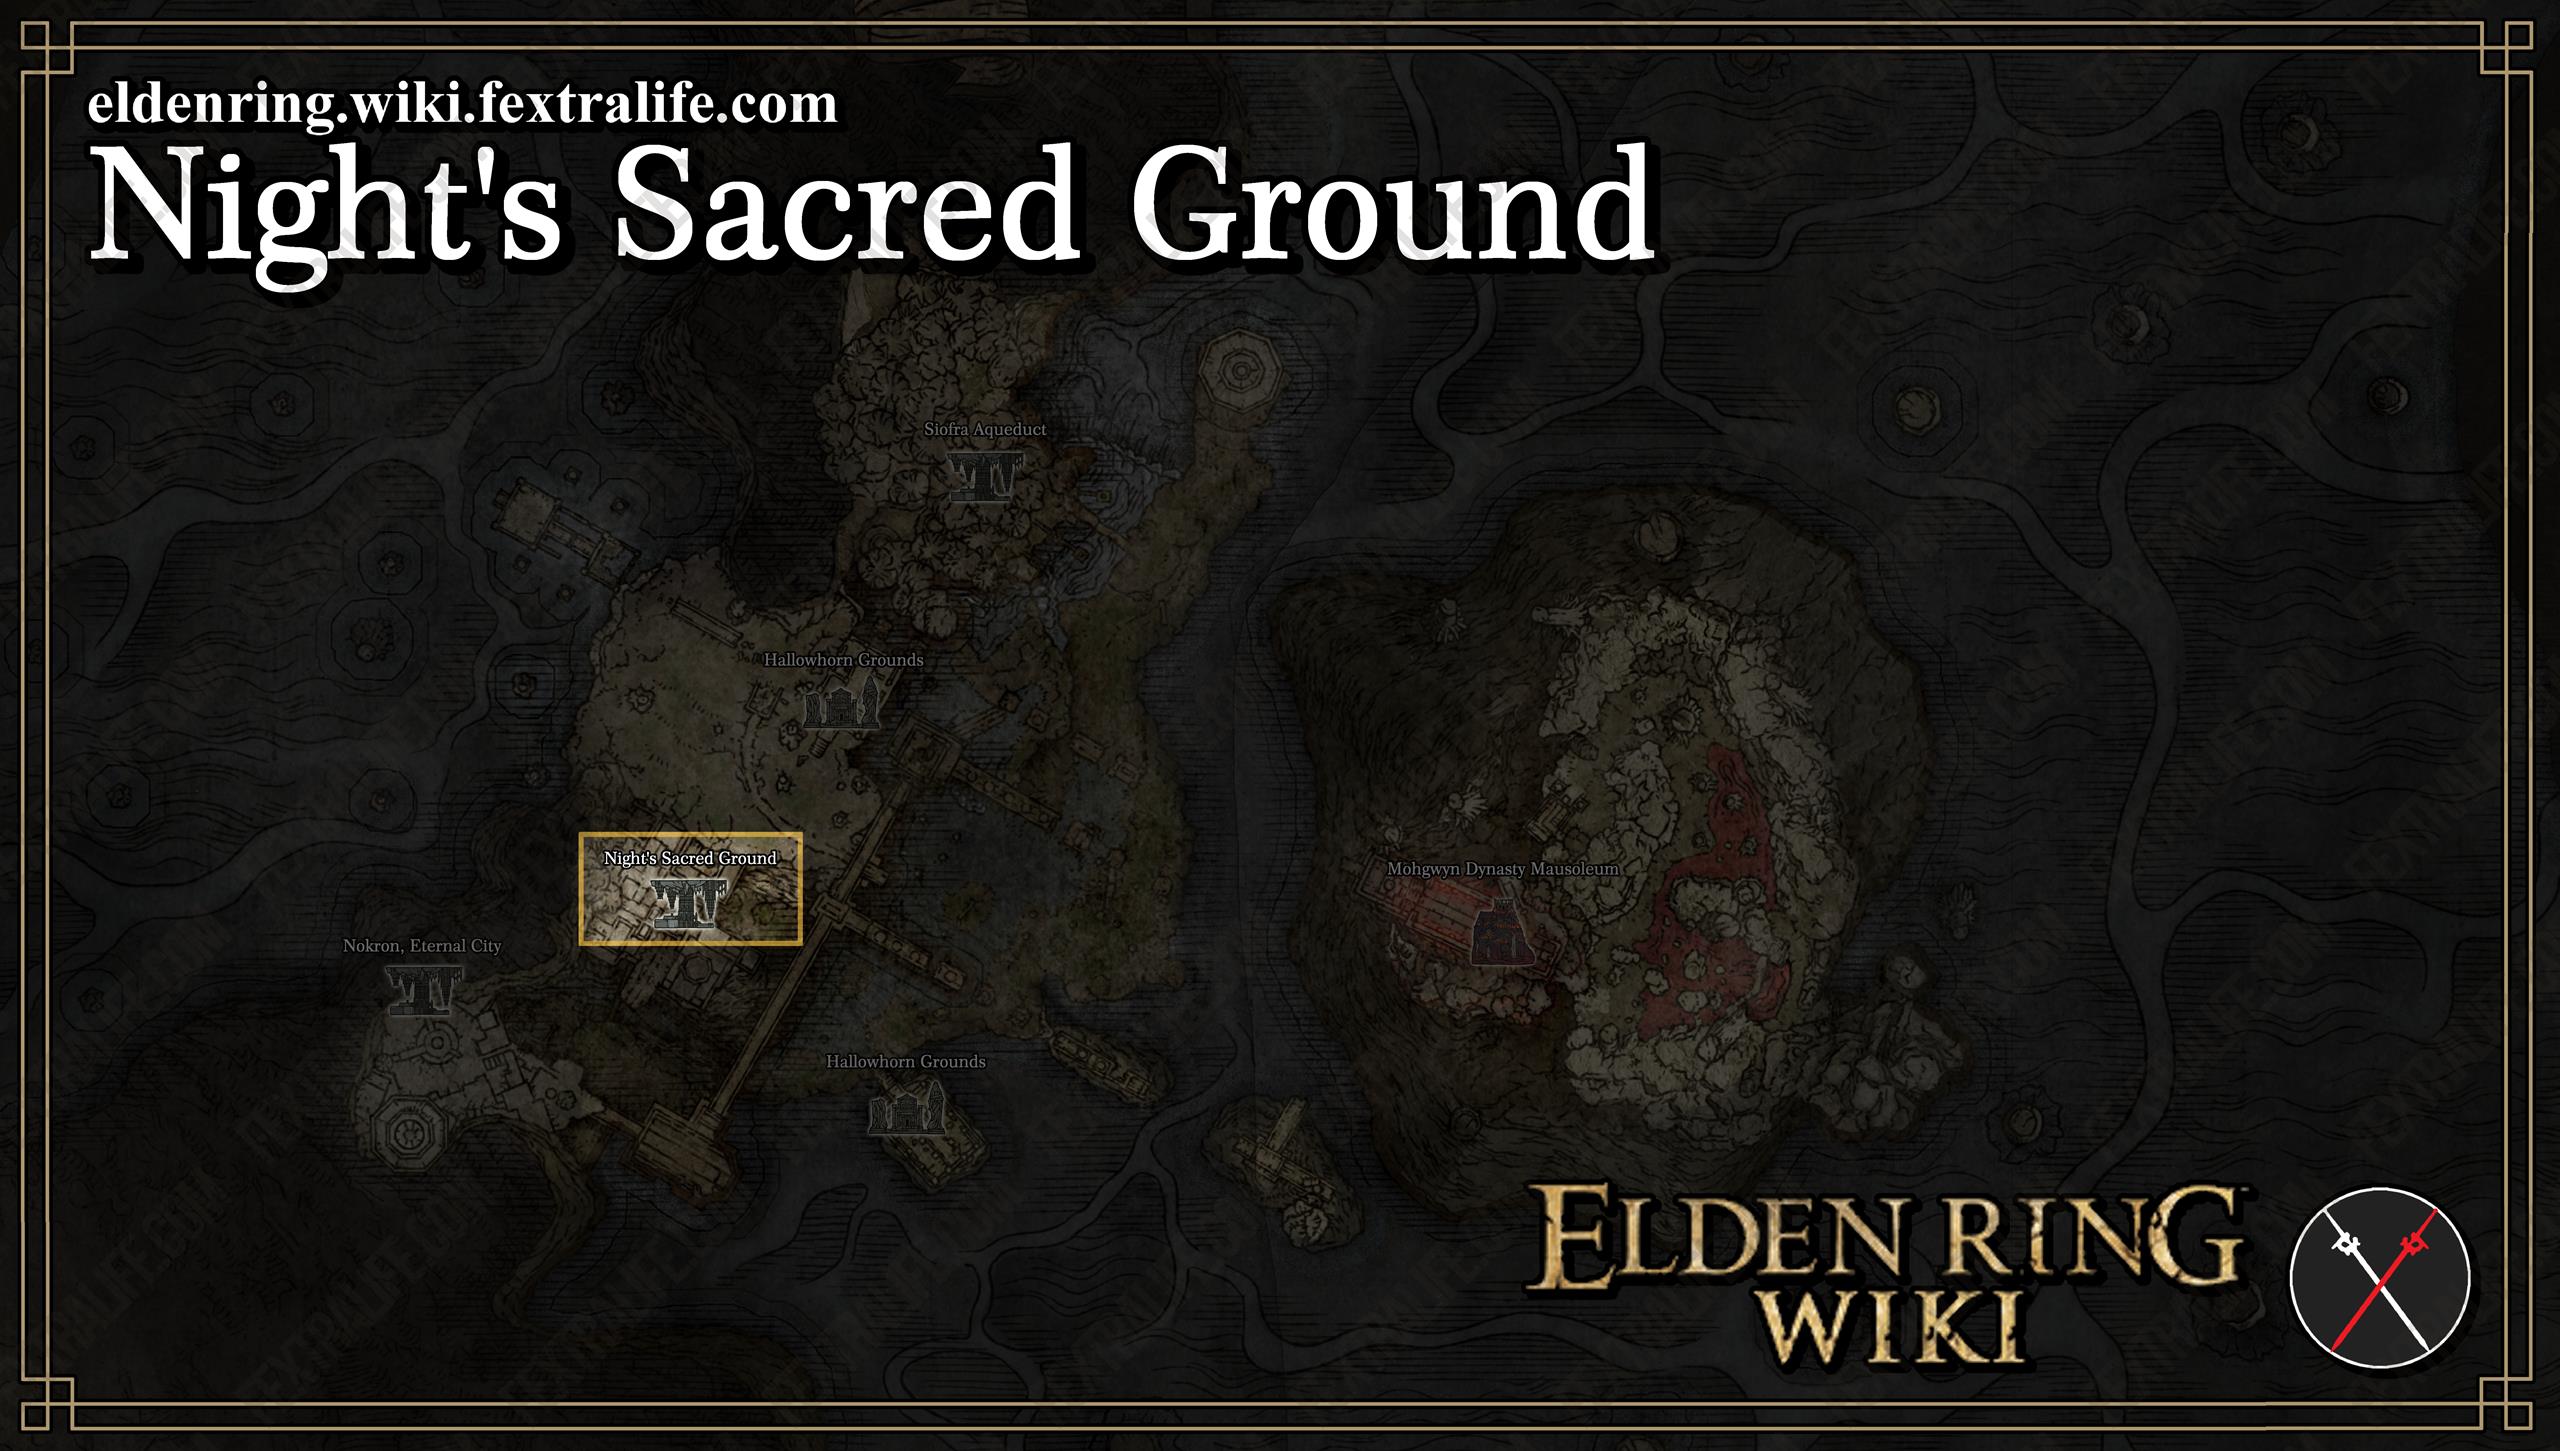 Elden Ring guide: Ranni's quest, Night's Sacred Ground, and the